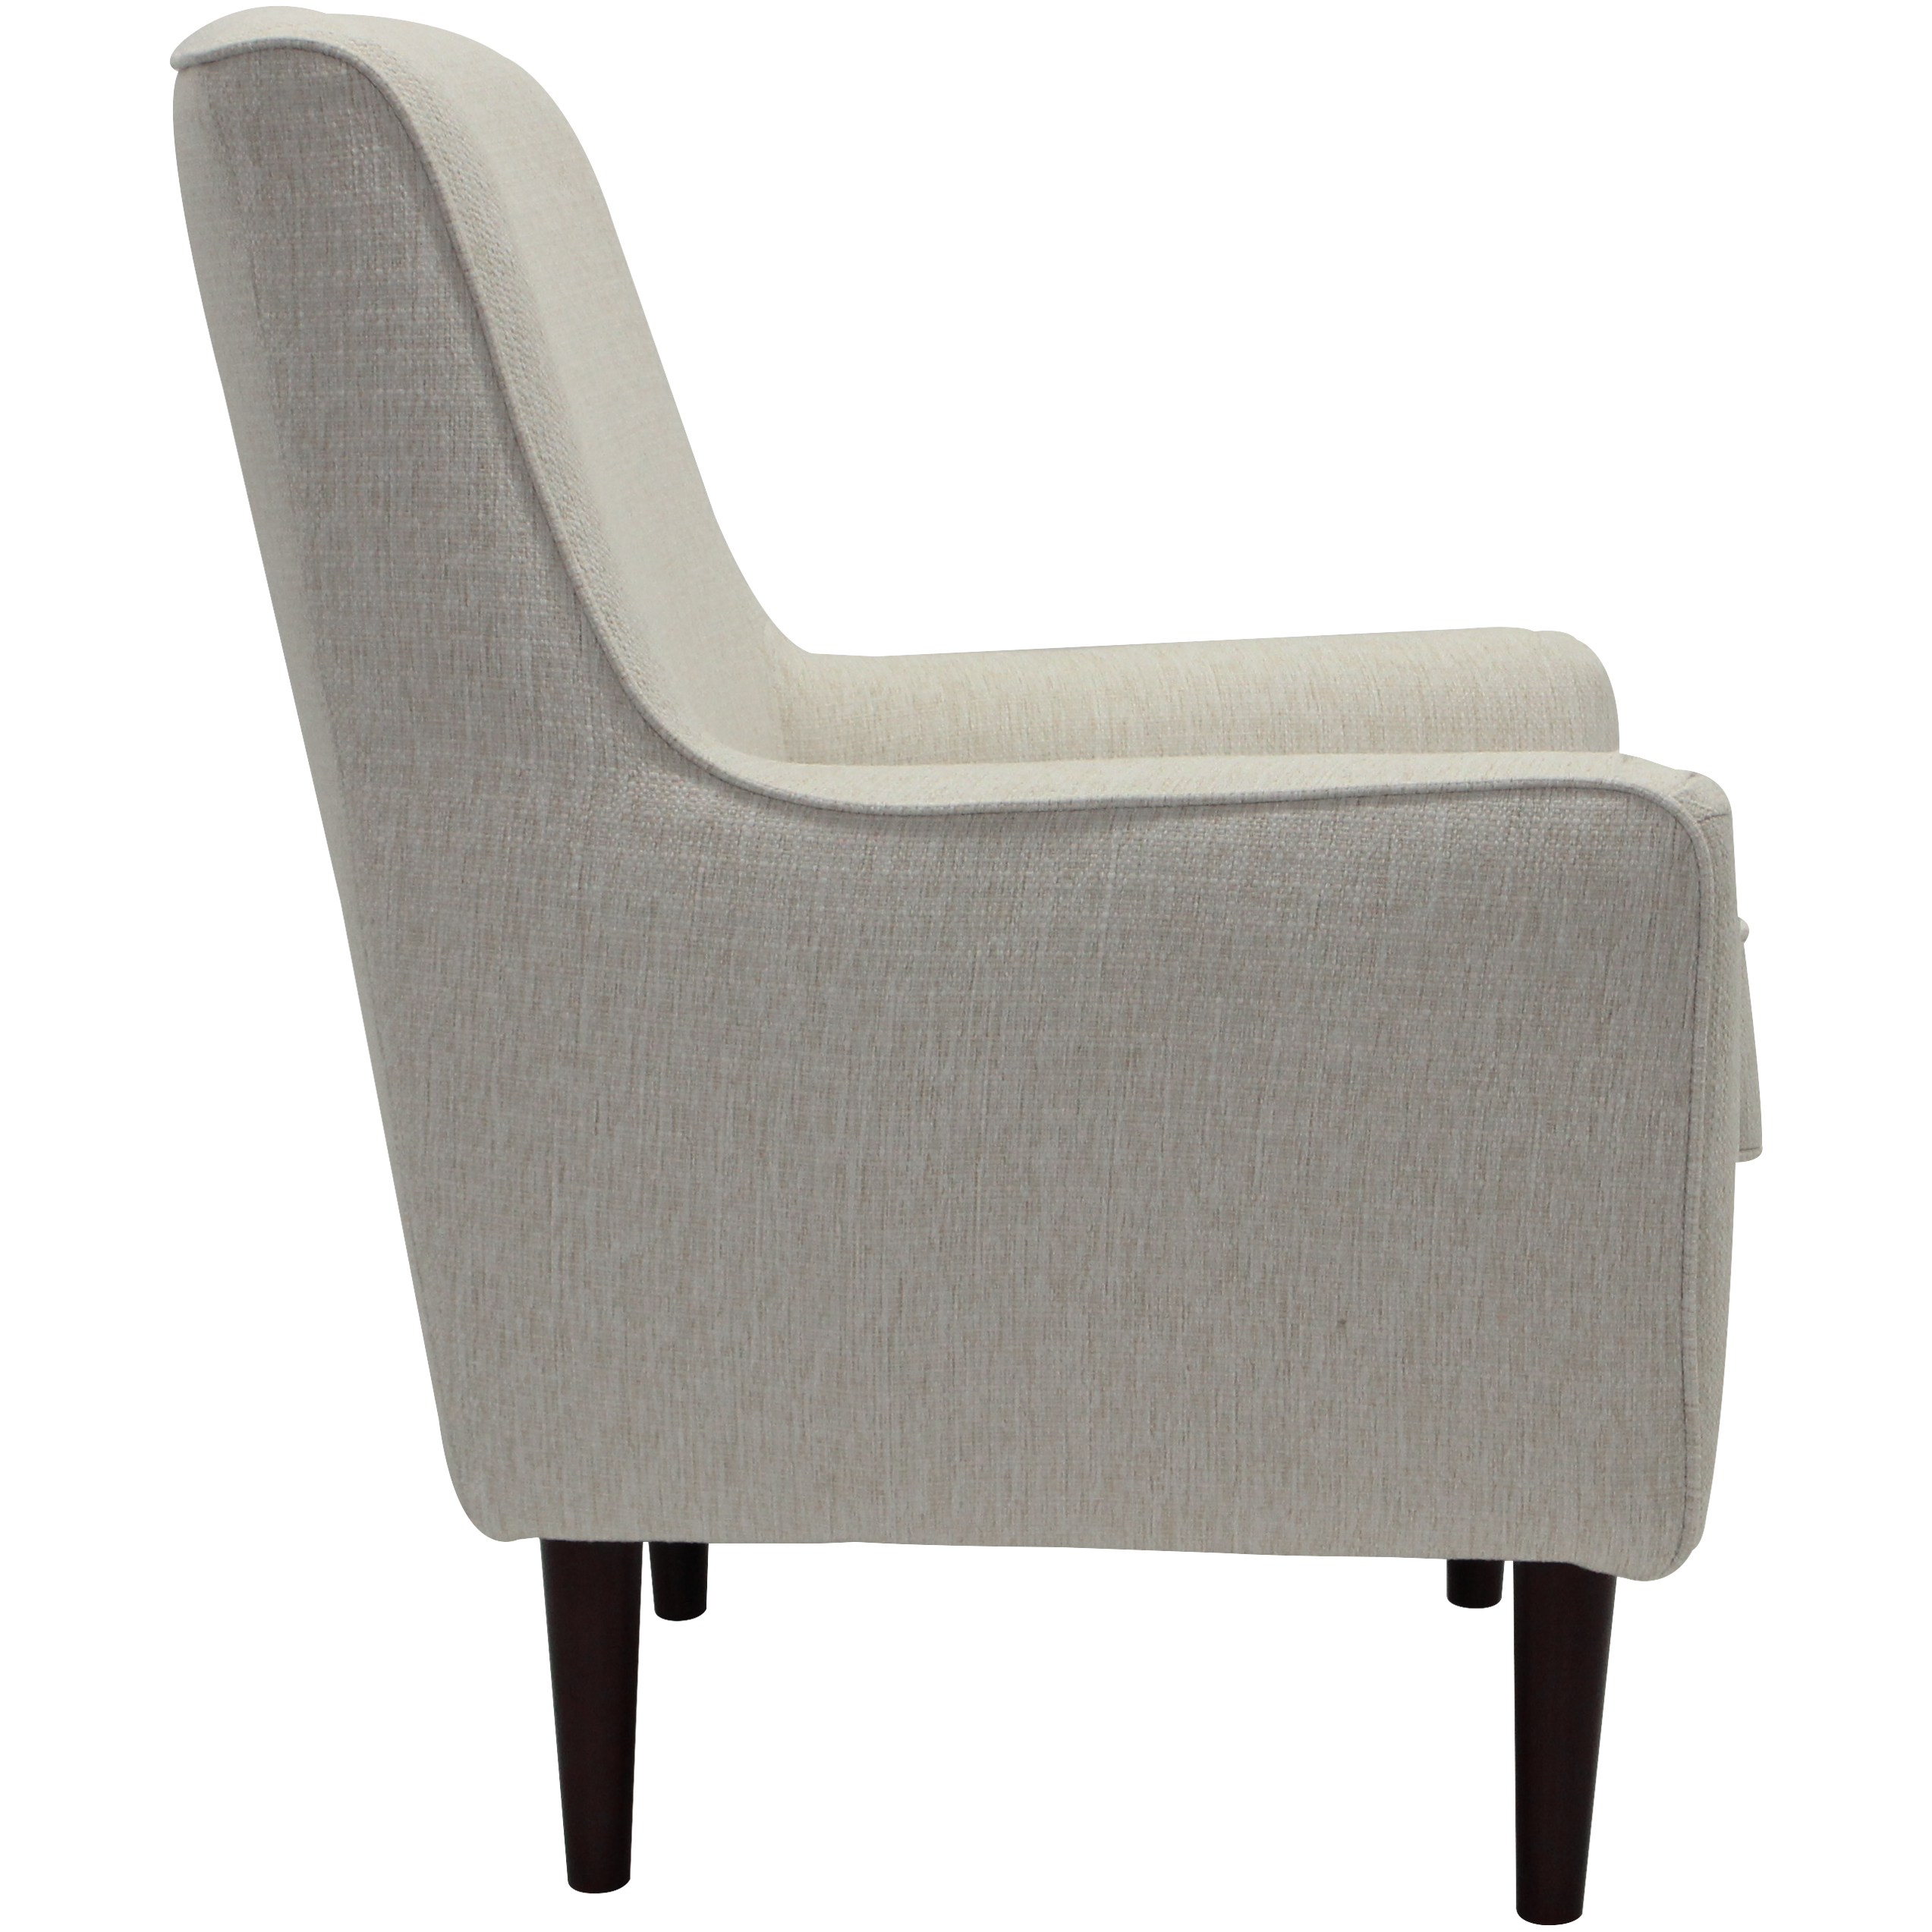 Better Homes & Gardens Poppy Lounge Chair, Multiple Colors - image 2 of 6